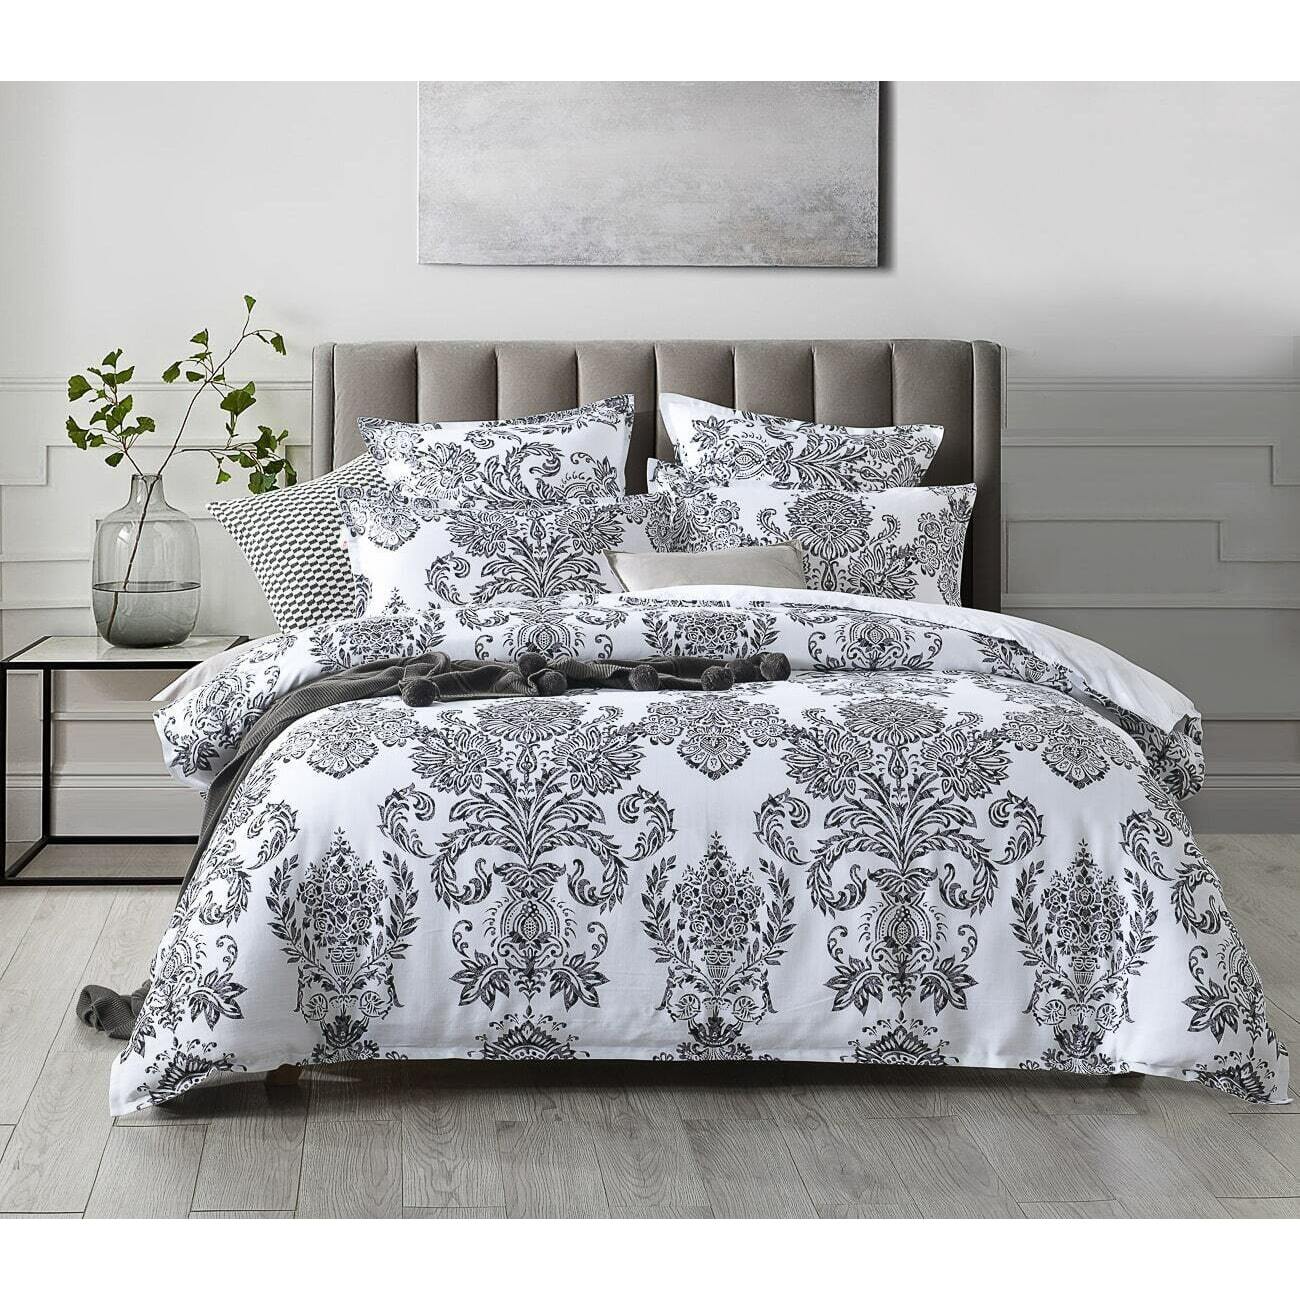 Barque Quilt Cover Set [SIZE: Double Bed]